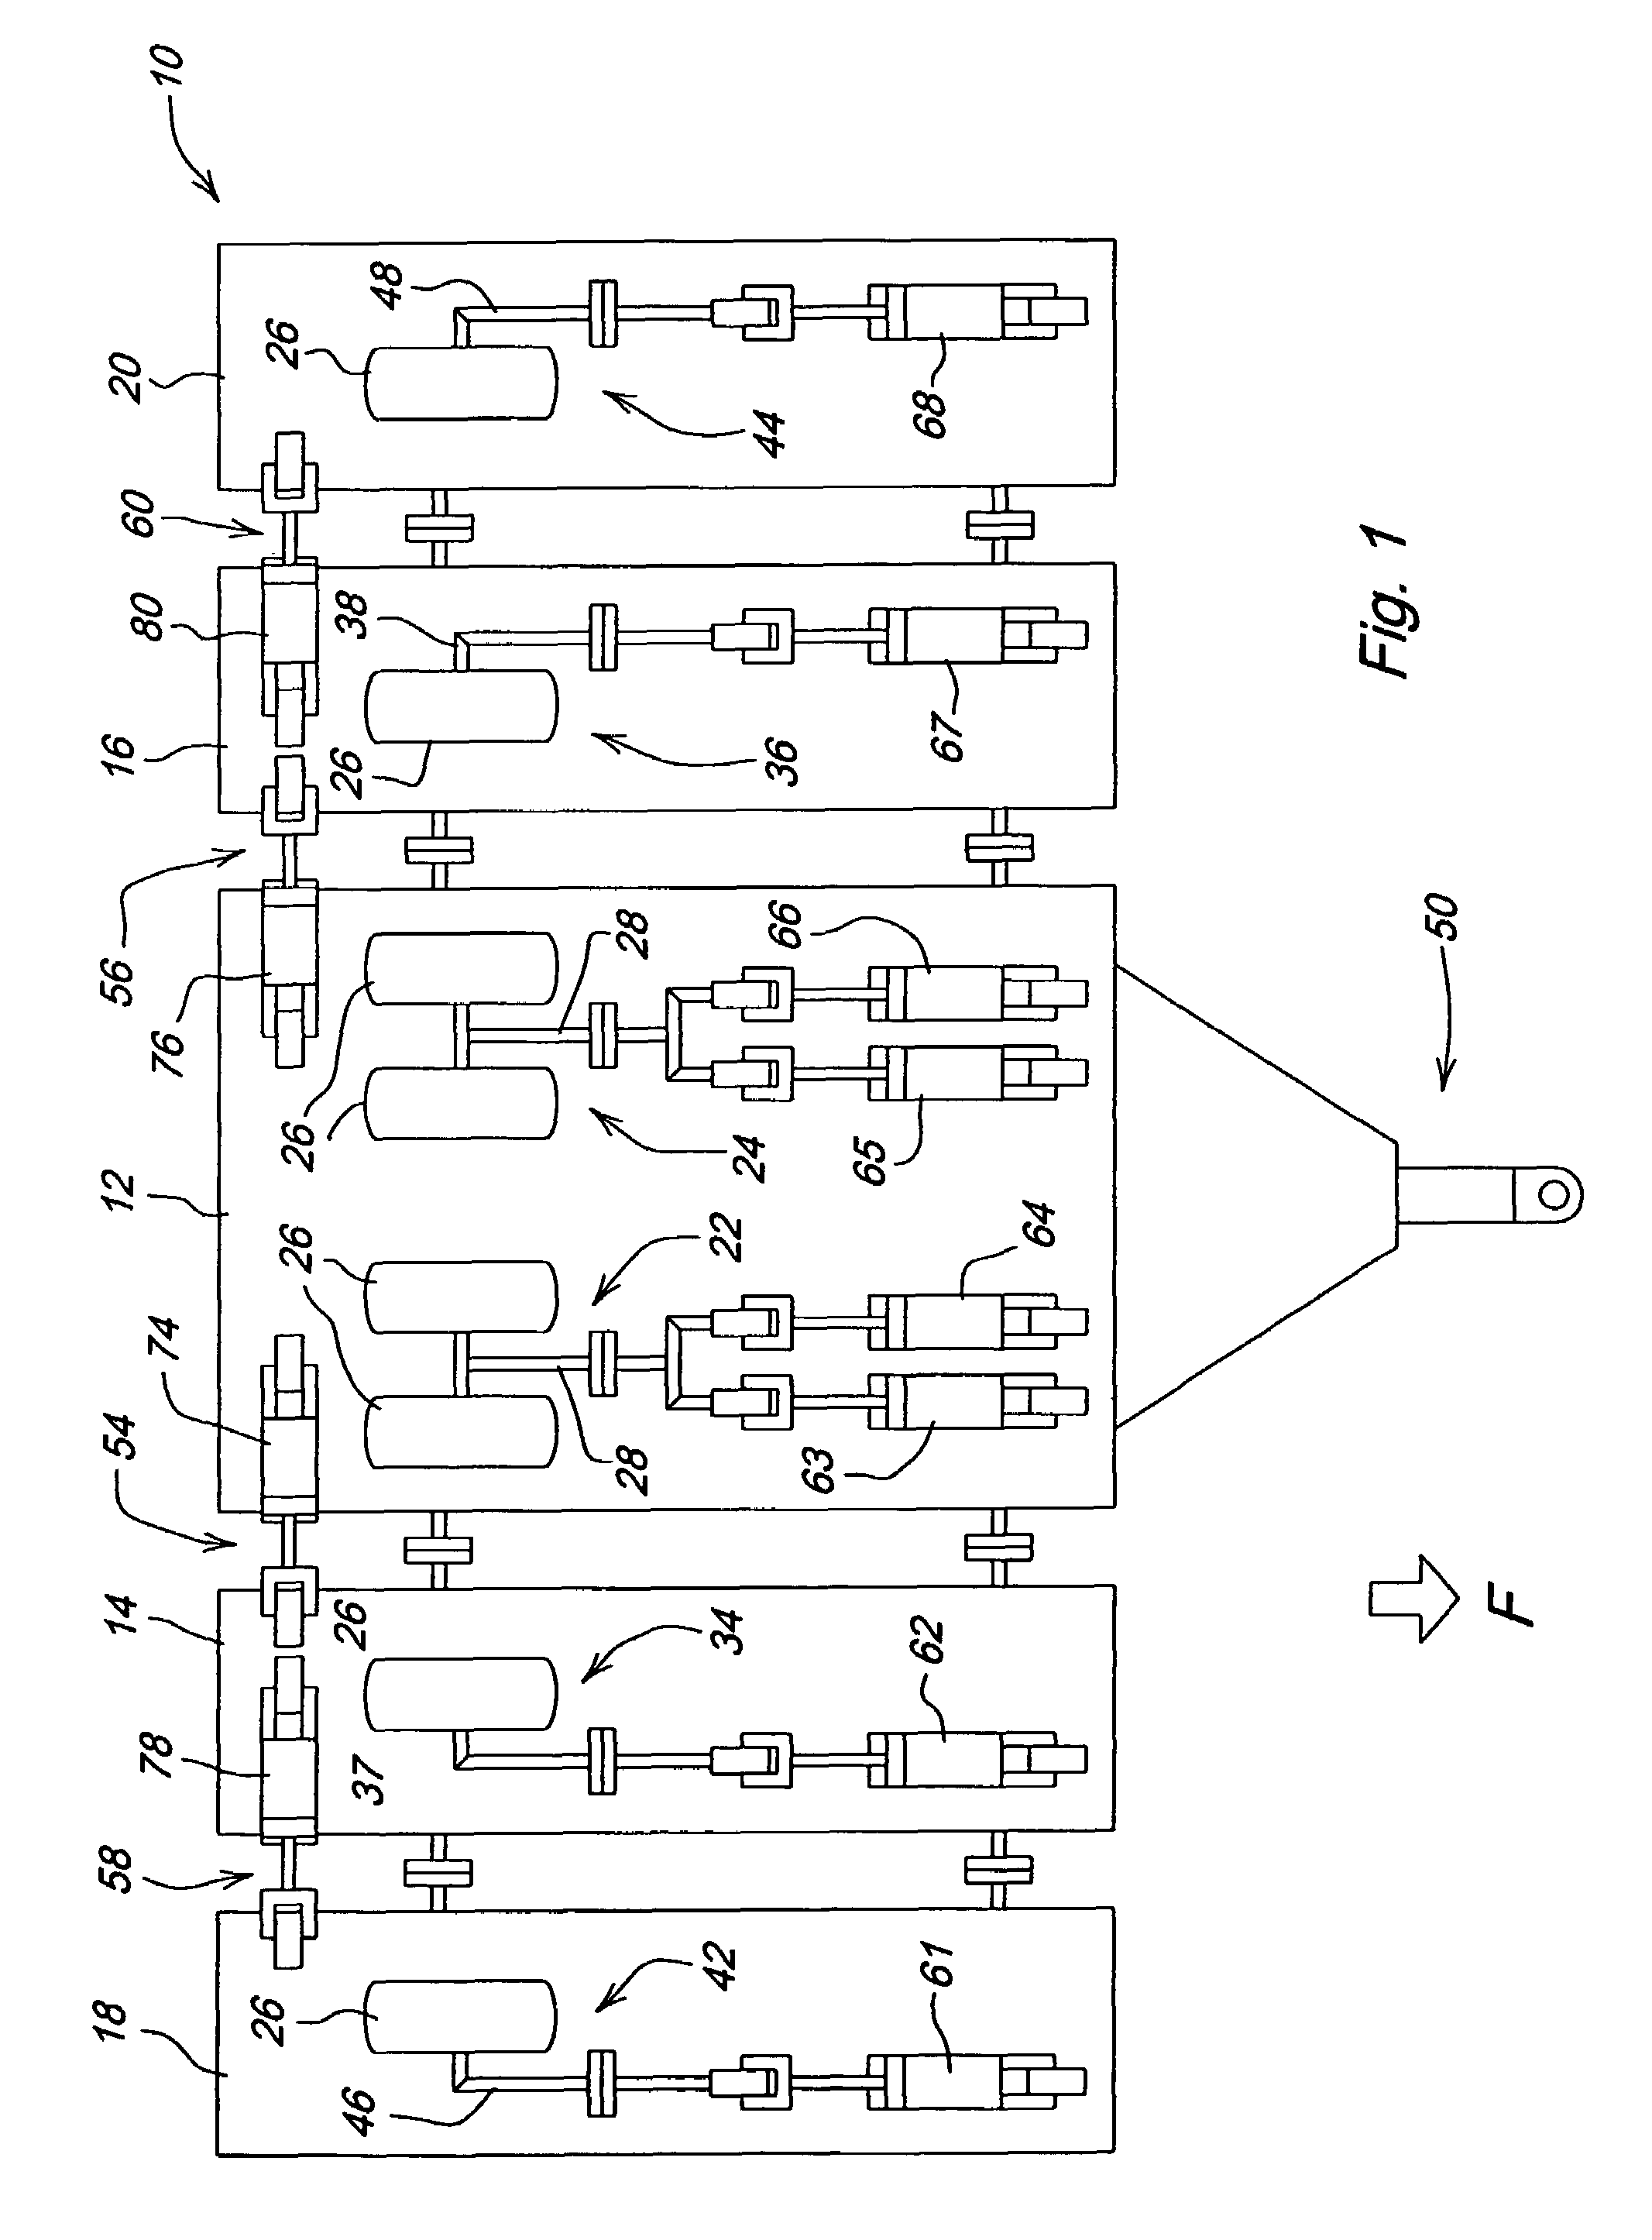 Cylinder synchronization for an implement lift system